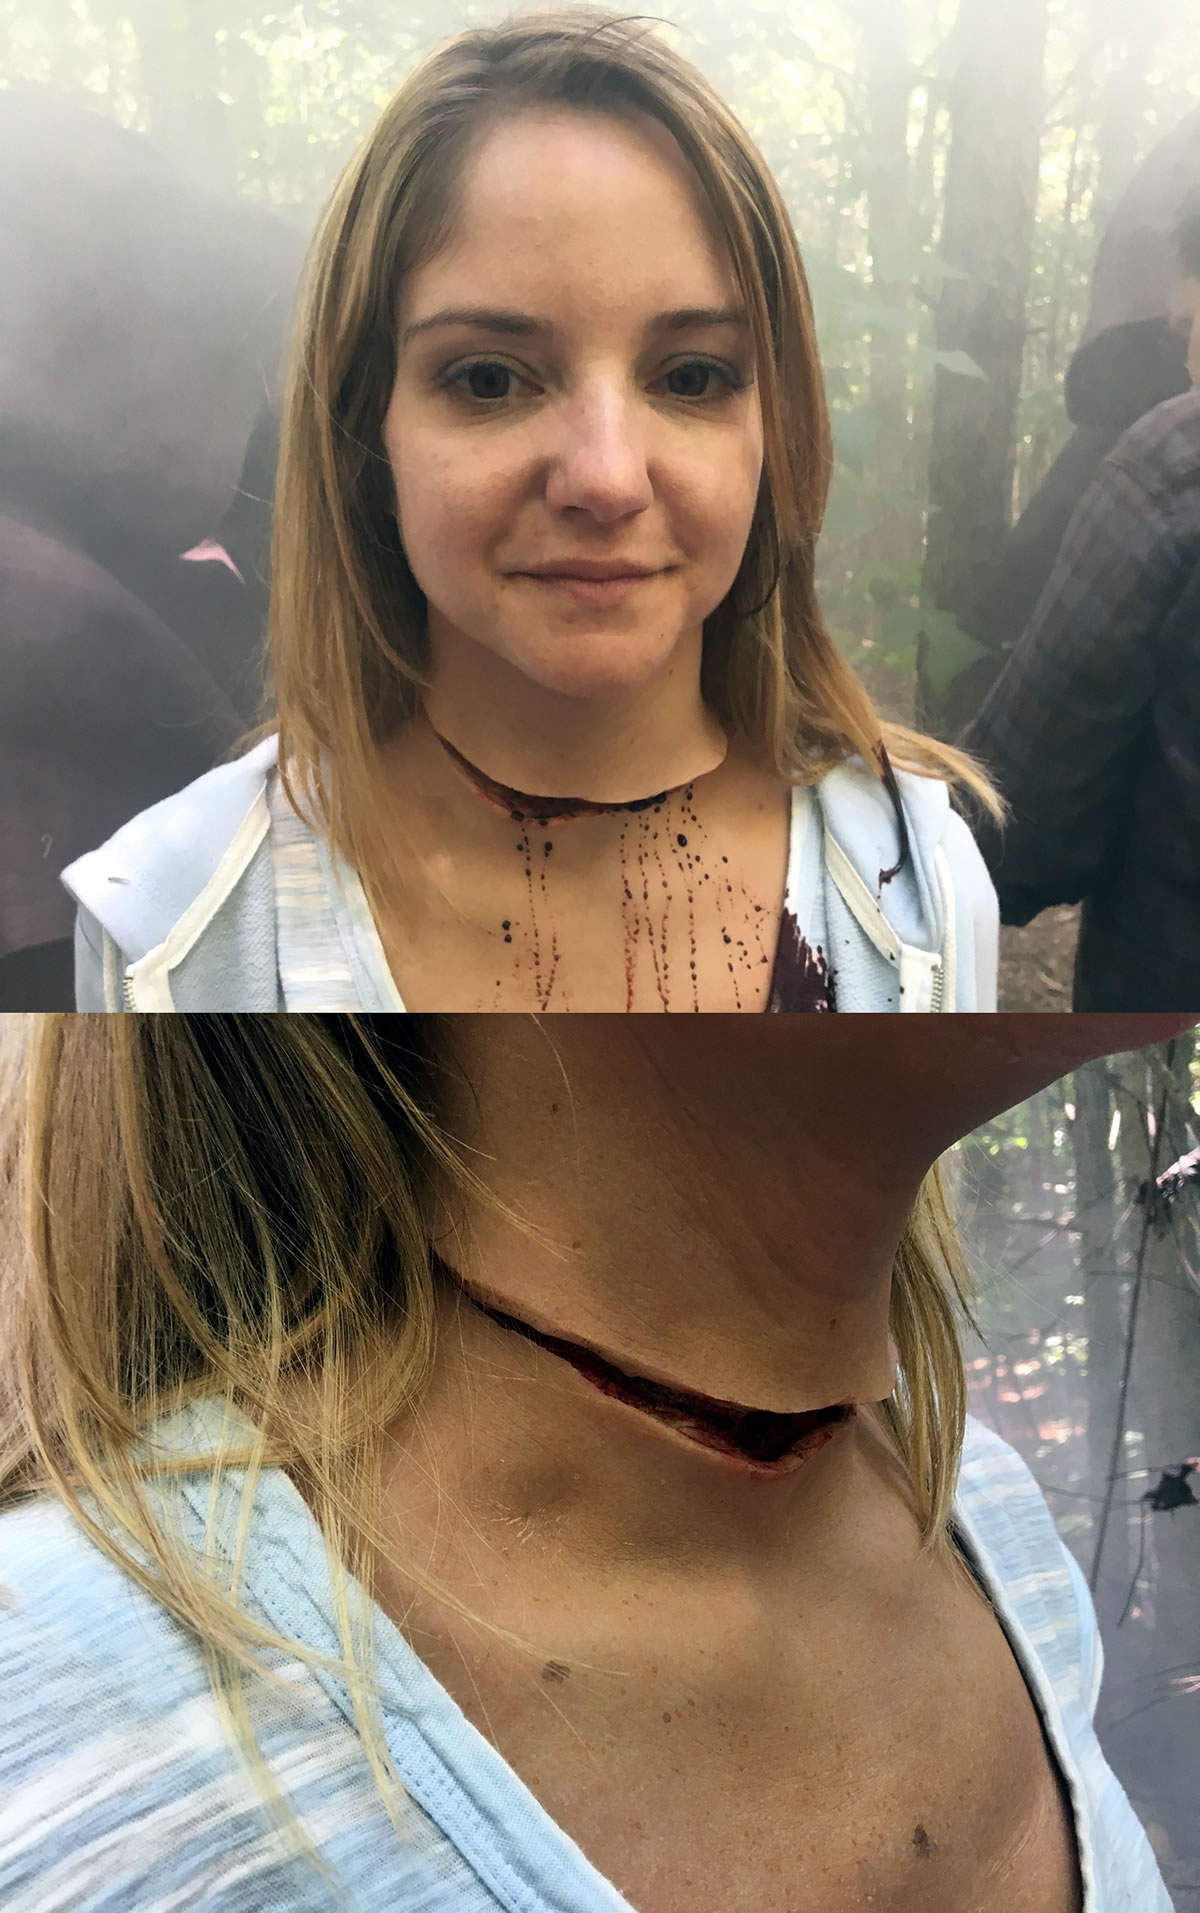 Slit neck with blood effect appliance for 'Stan Against Evil'